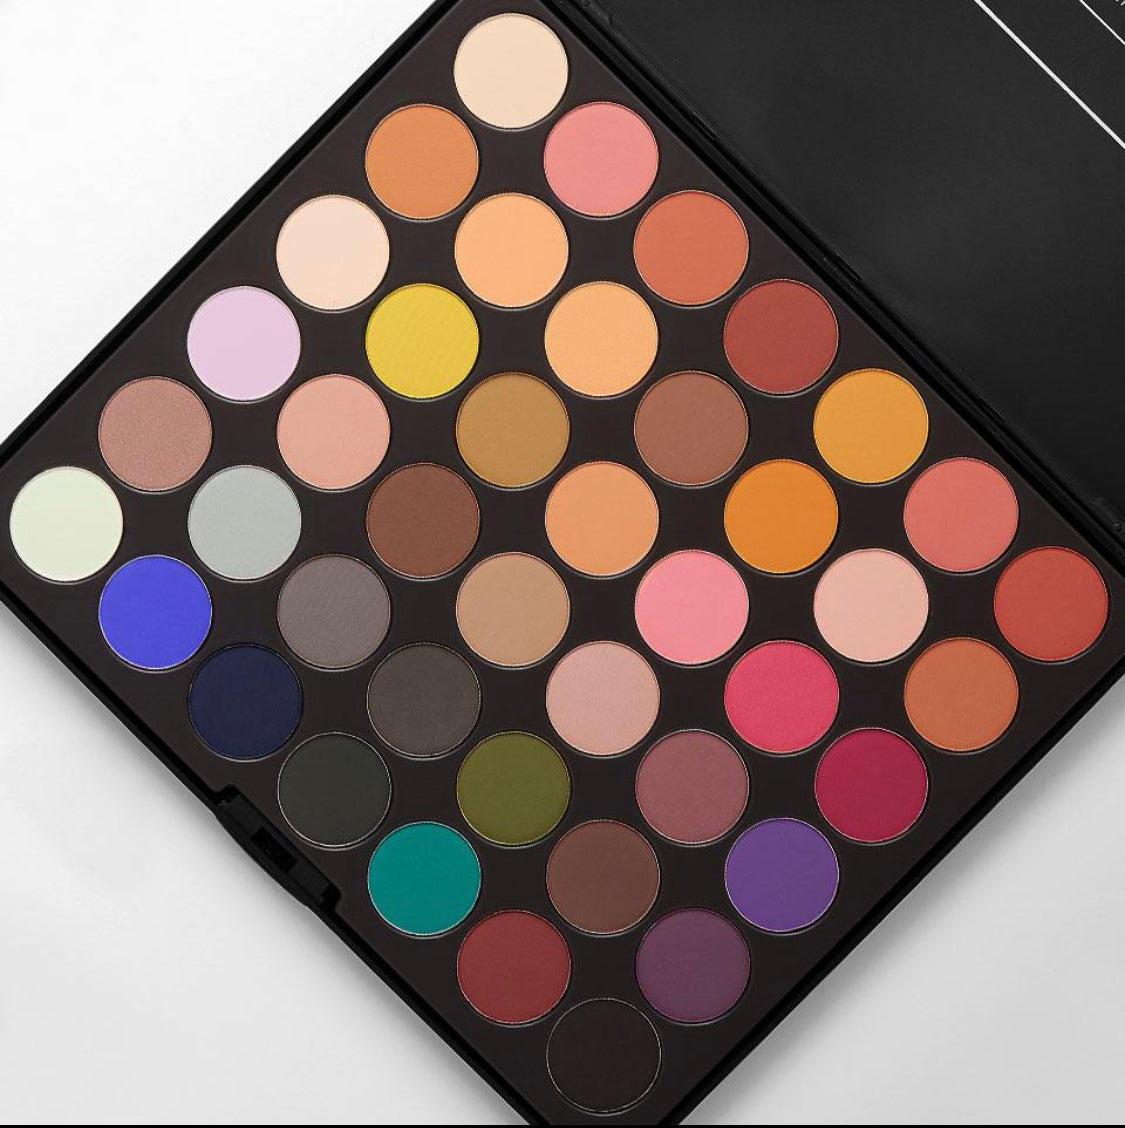 BH COSMETICS ULTIMATE MATTE 42 COLOR EYESHADOW PALETTE Minoustore